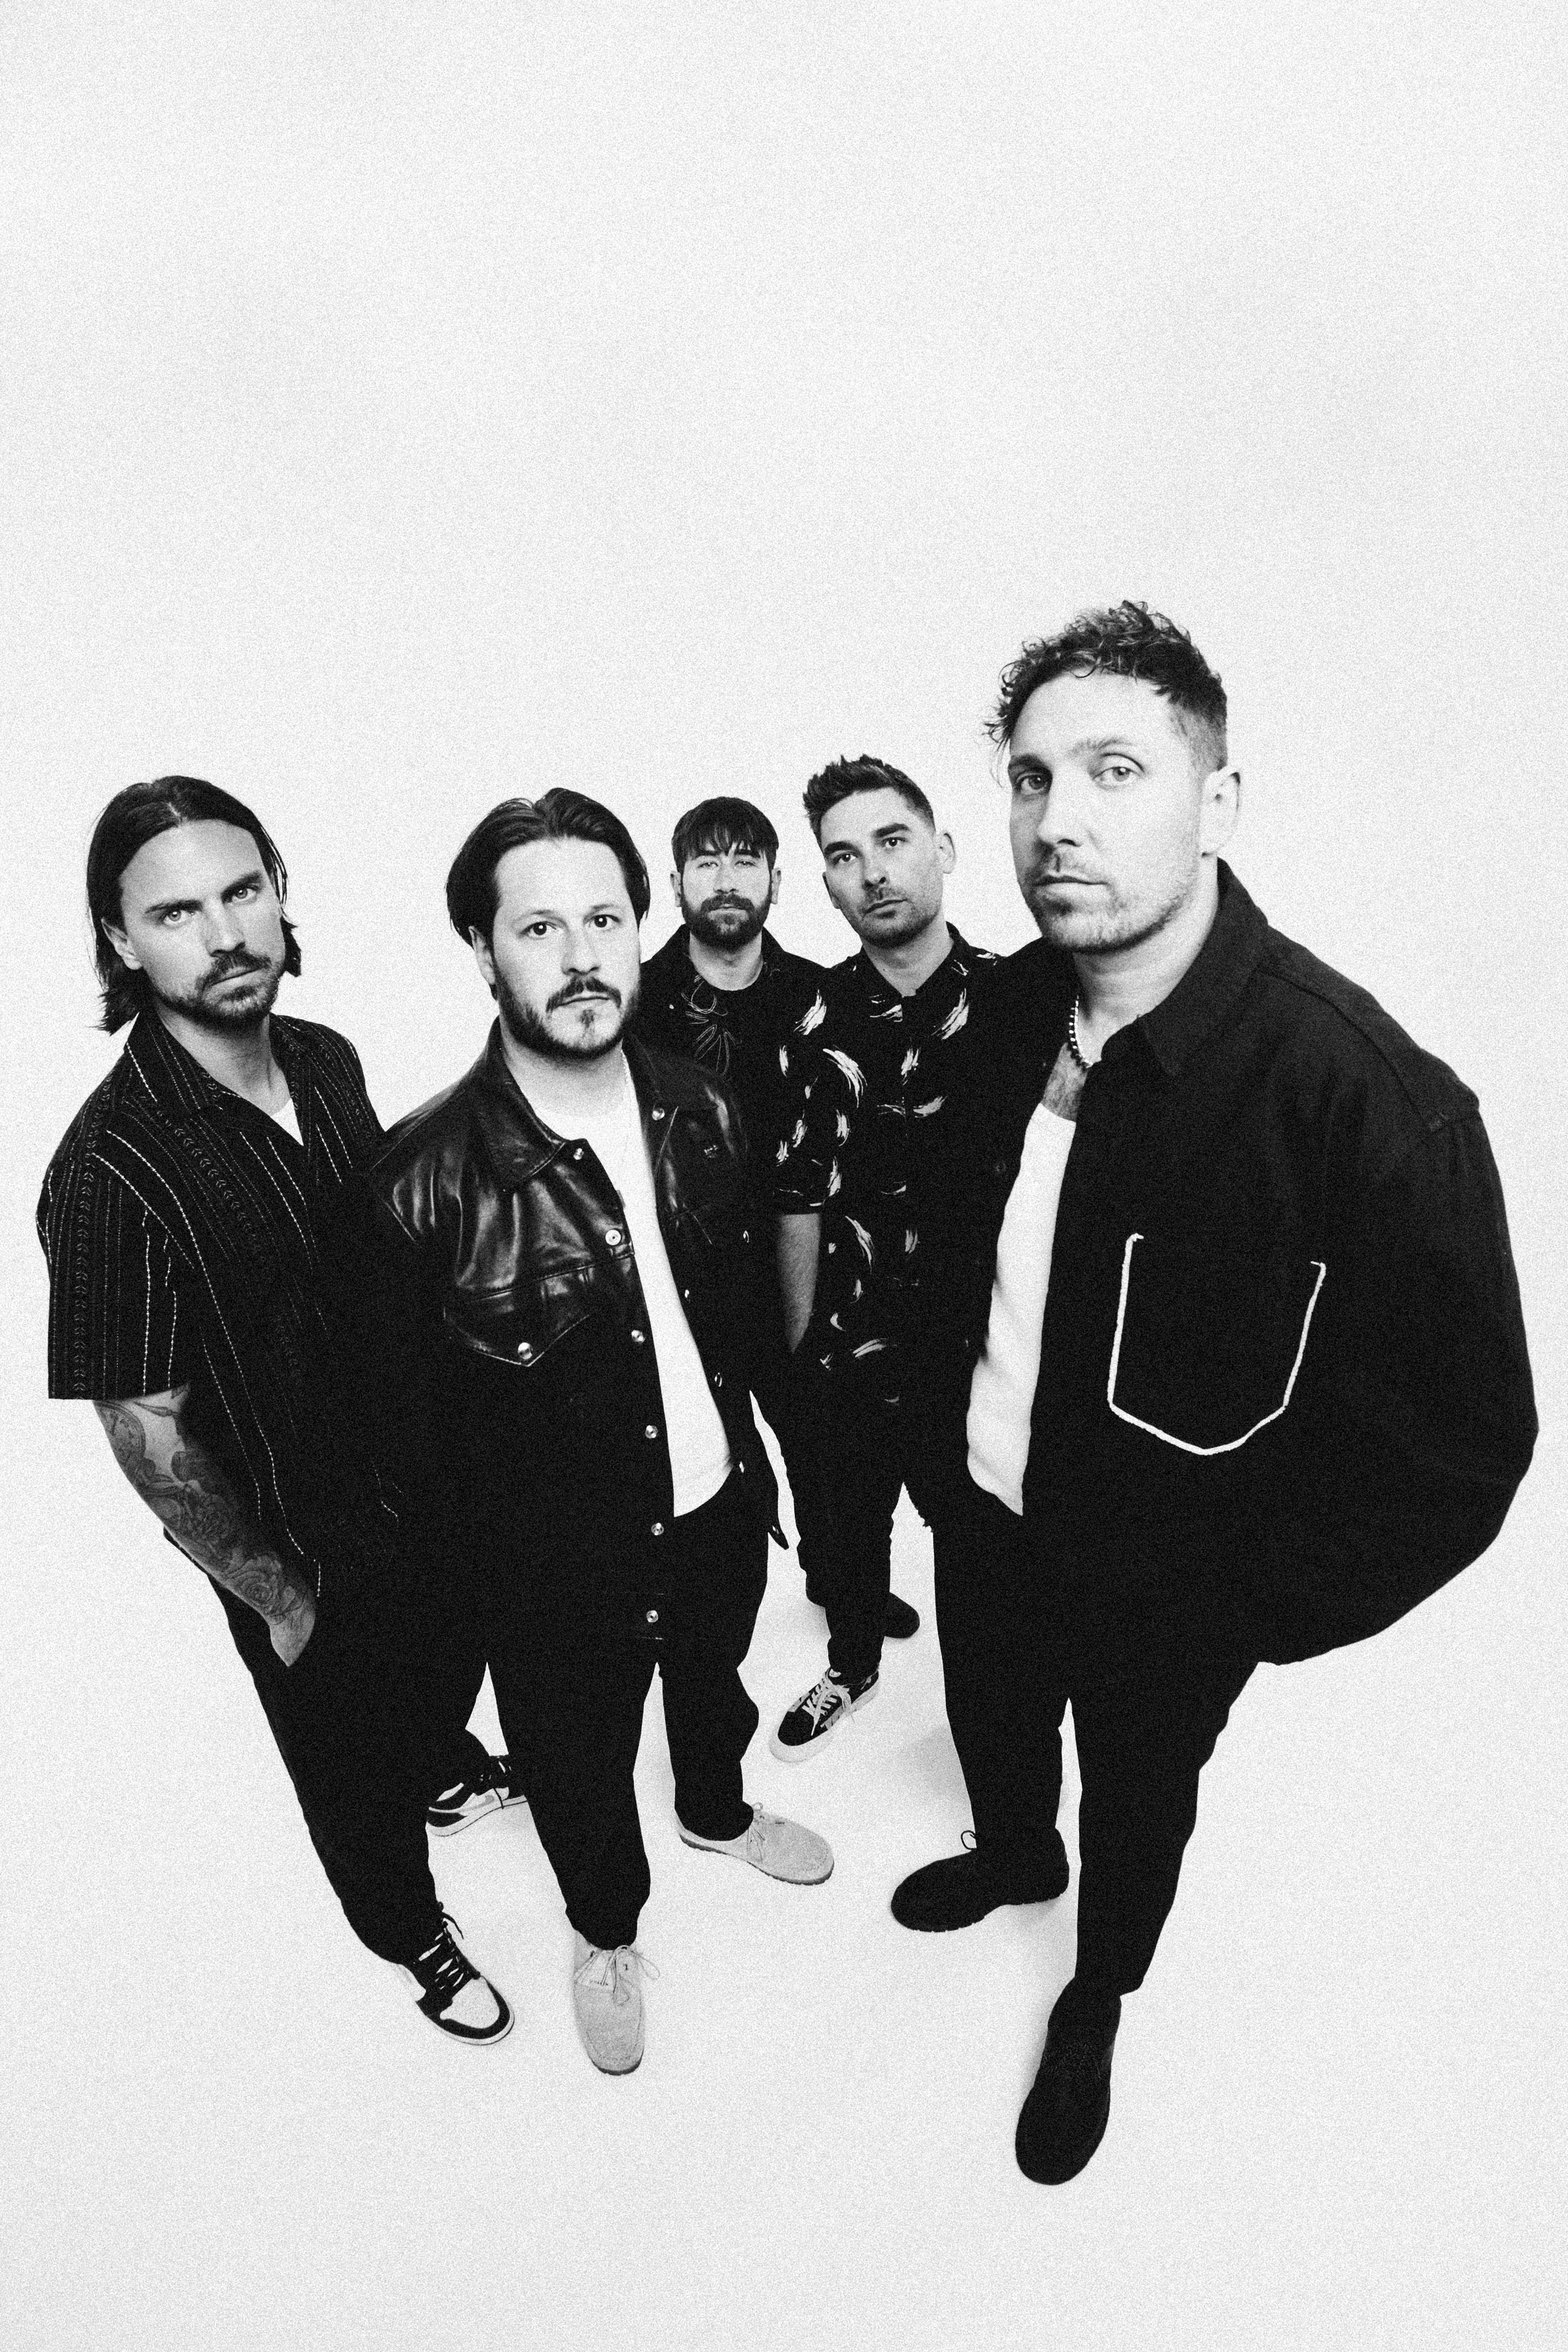 You Me At Six - the Final Nights of Six pre-sale password for legit tickets in Newcastle Upon Tyne